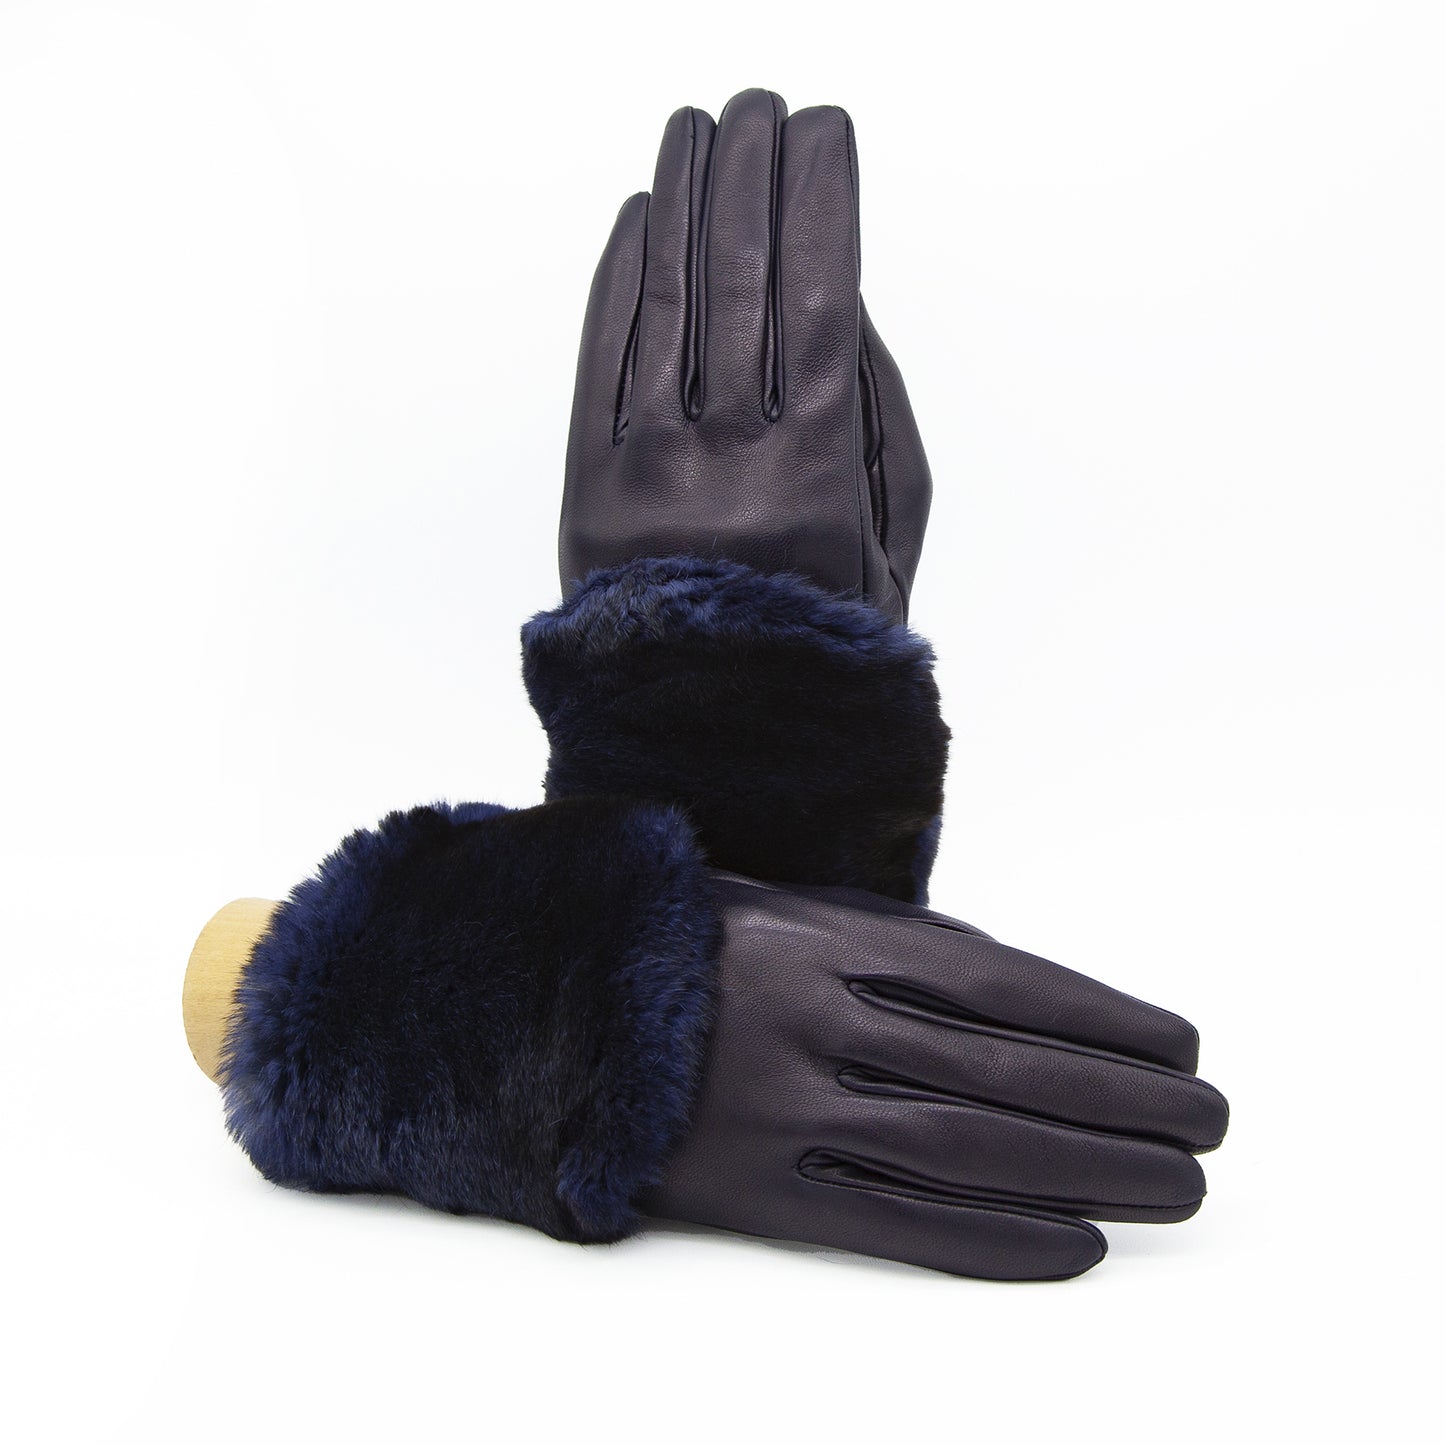 Women's blue nappa leather gloves with a wide real fur panel on the top and cashmere lined